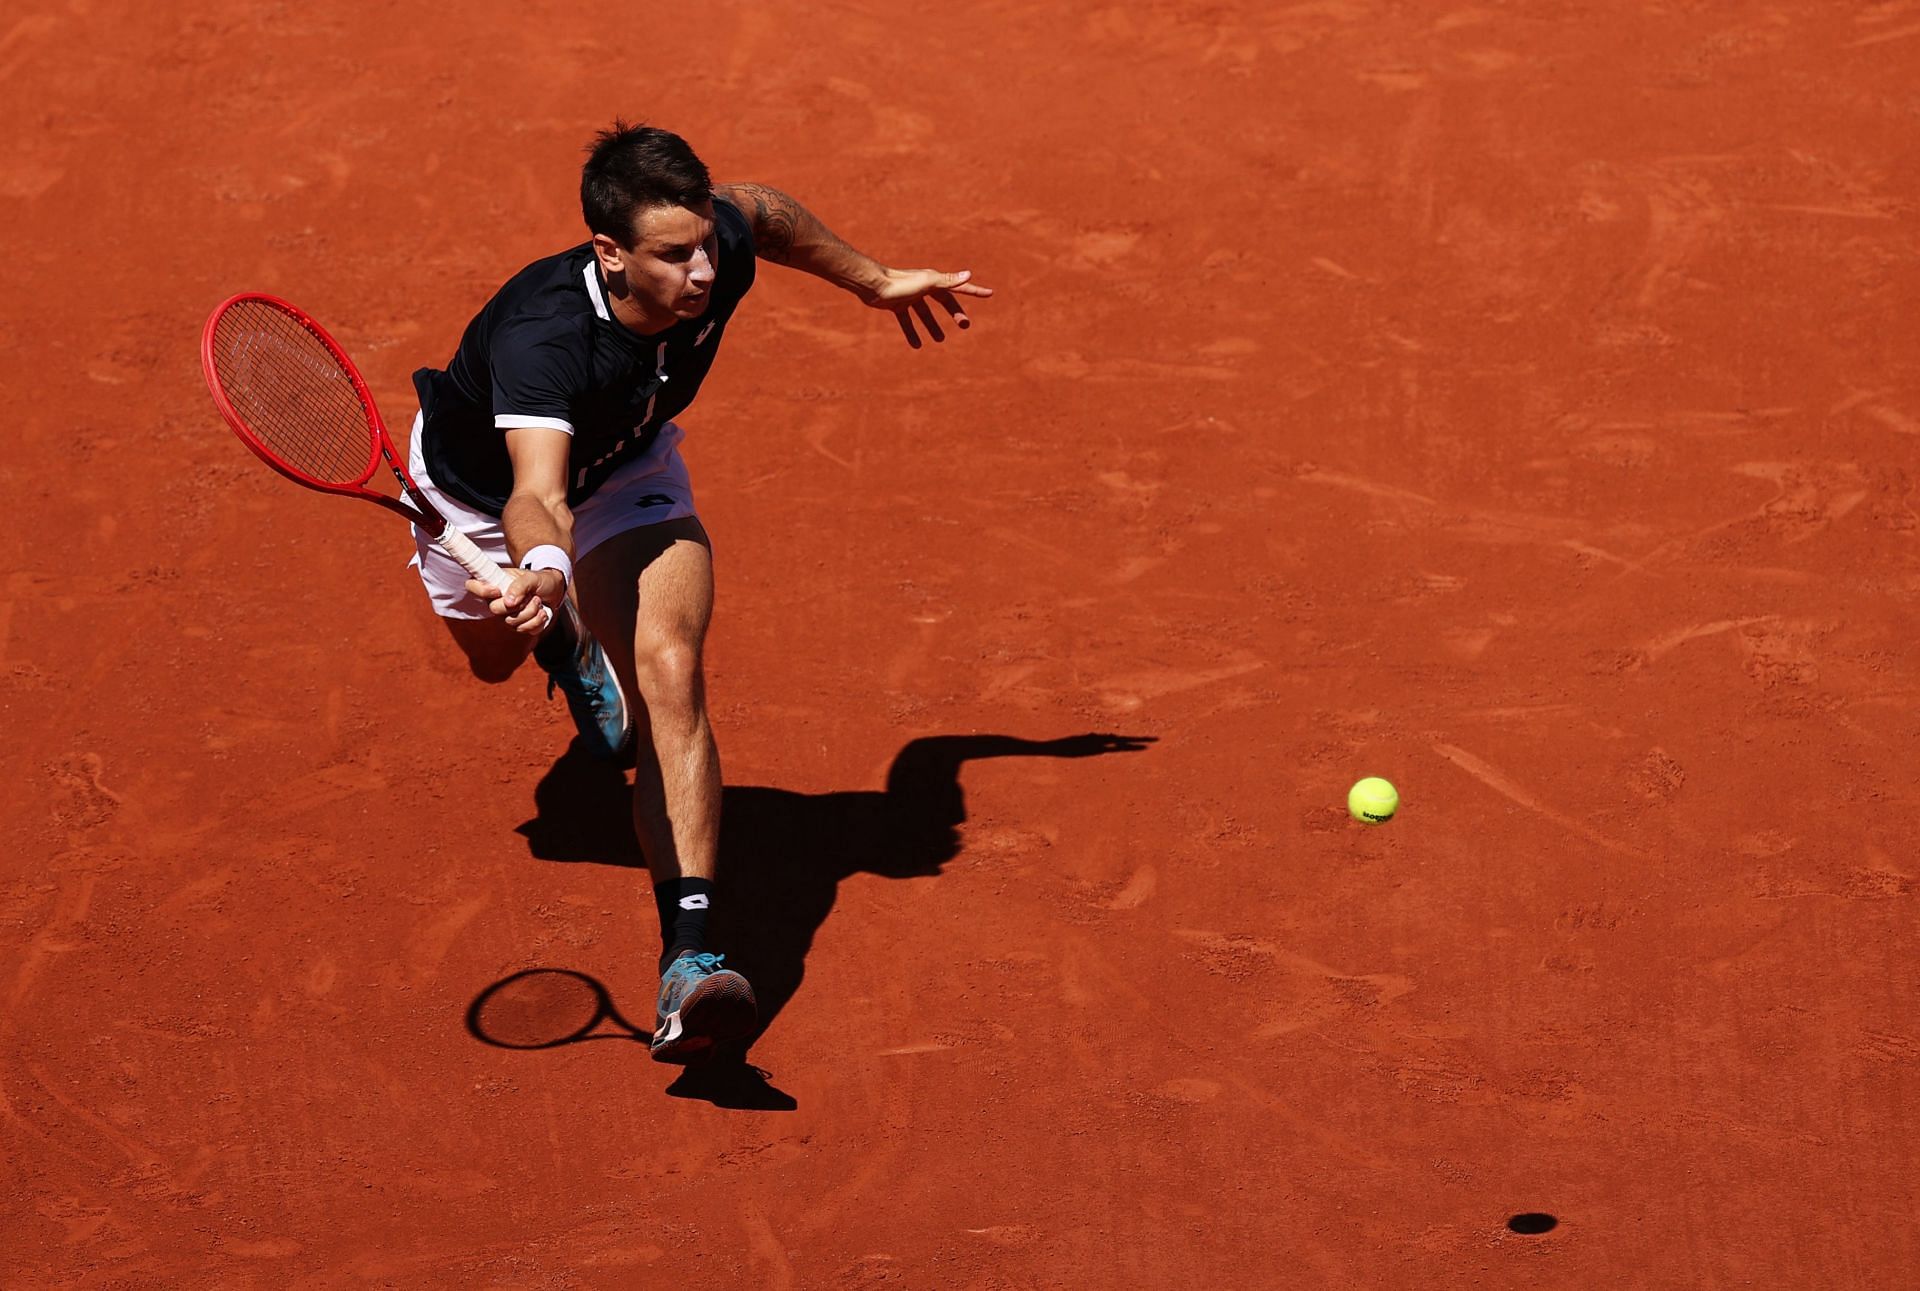 Camilo Ugo Carabelli at the 2022 French Open